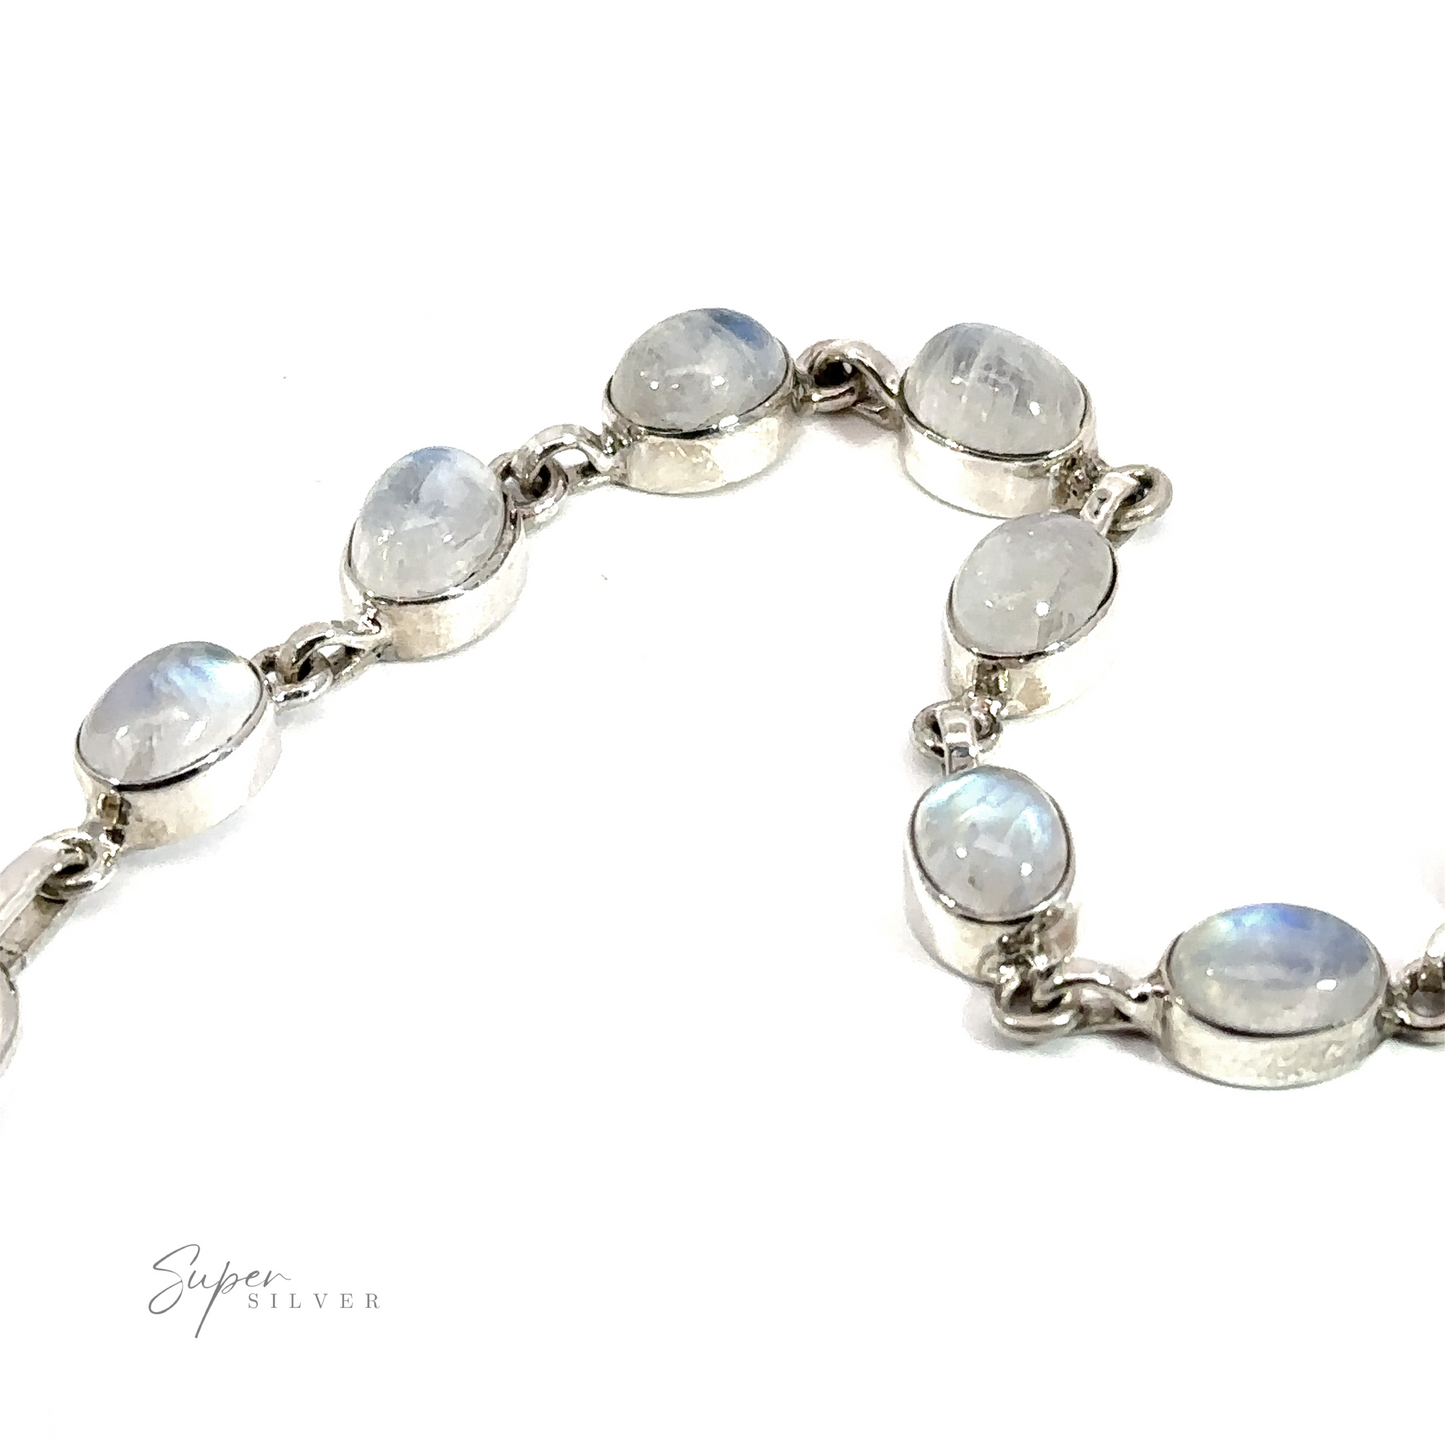 A Vibrant Oval Moonstone Bracelet with .925 silver beads on it.